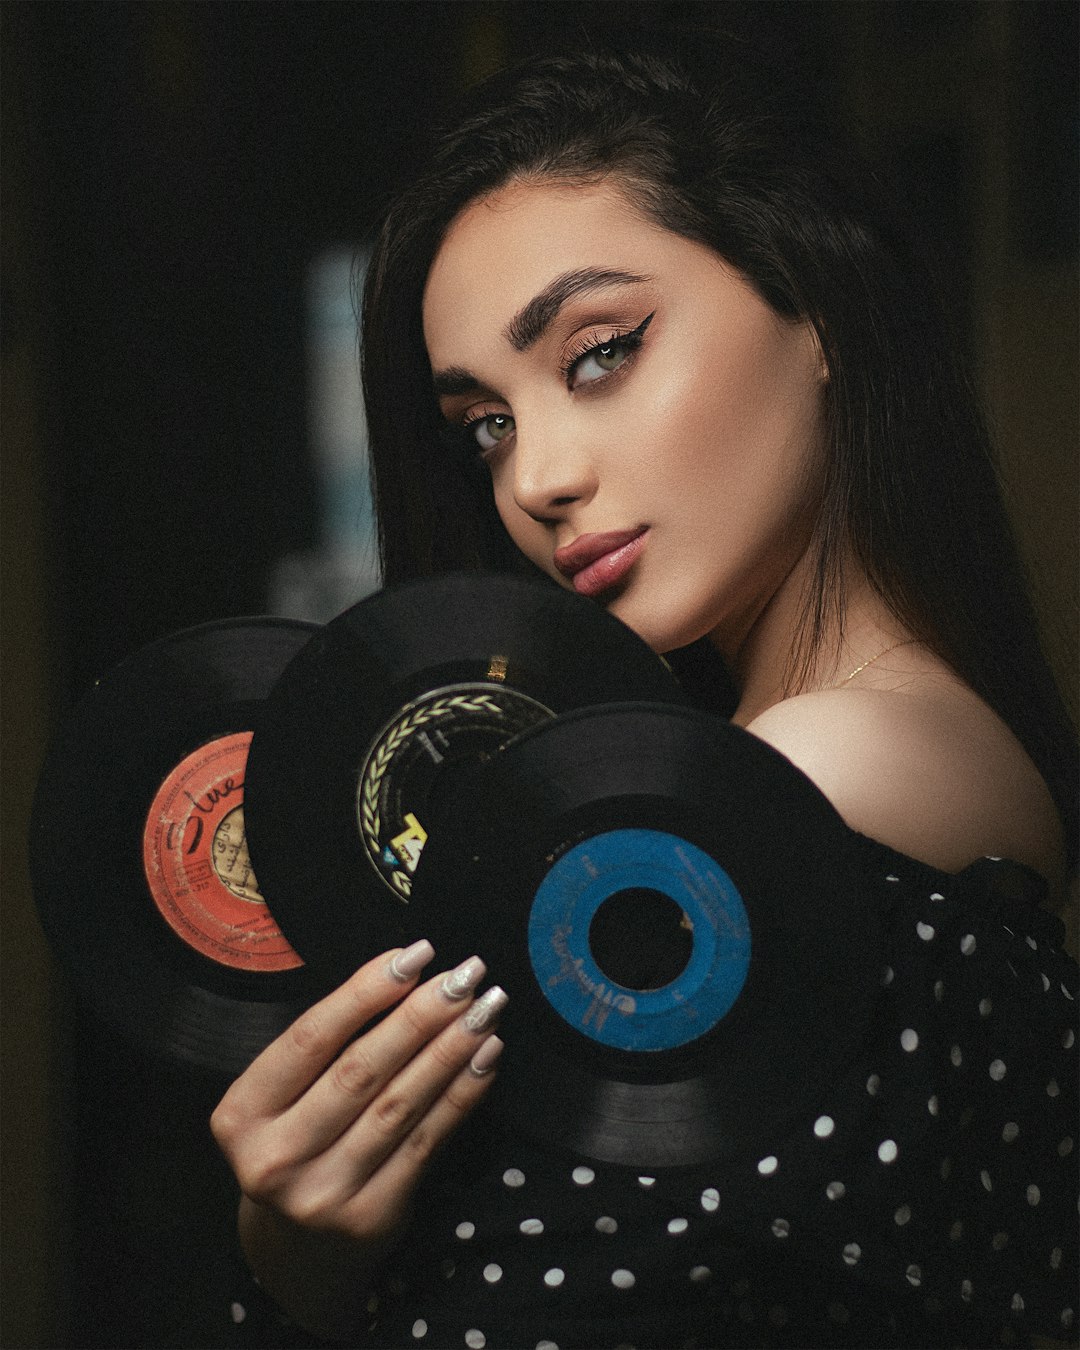 woman in black and white polka dot dress holding vinyl record